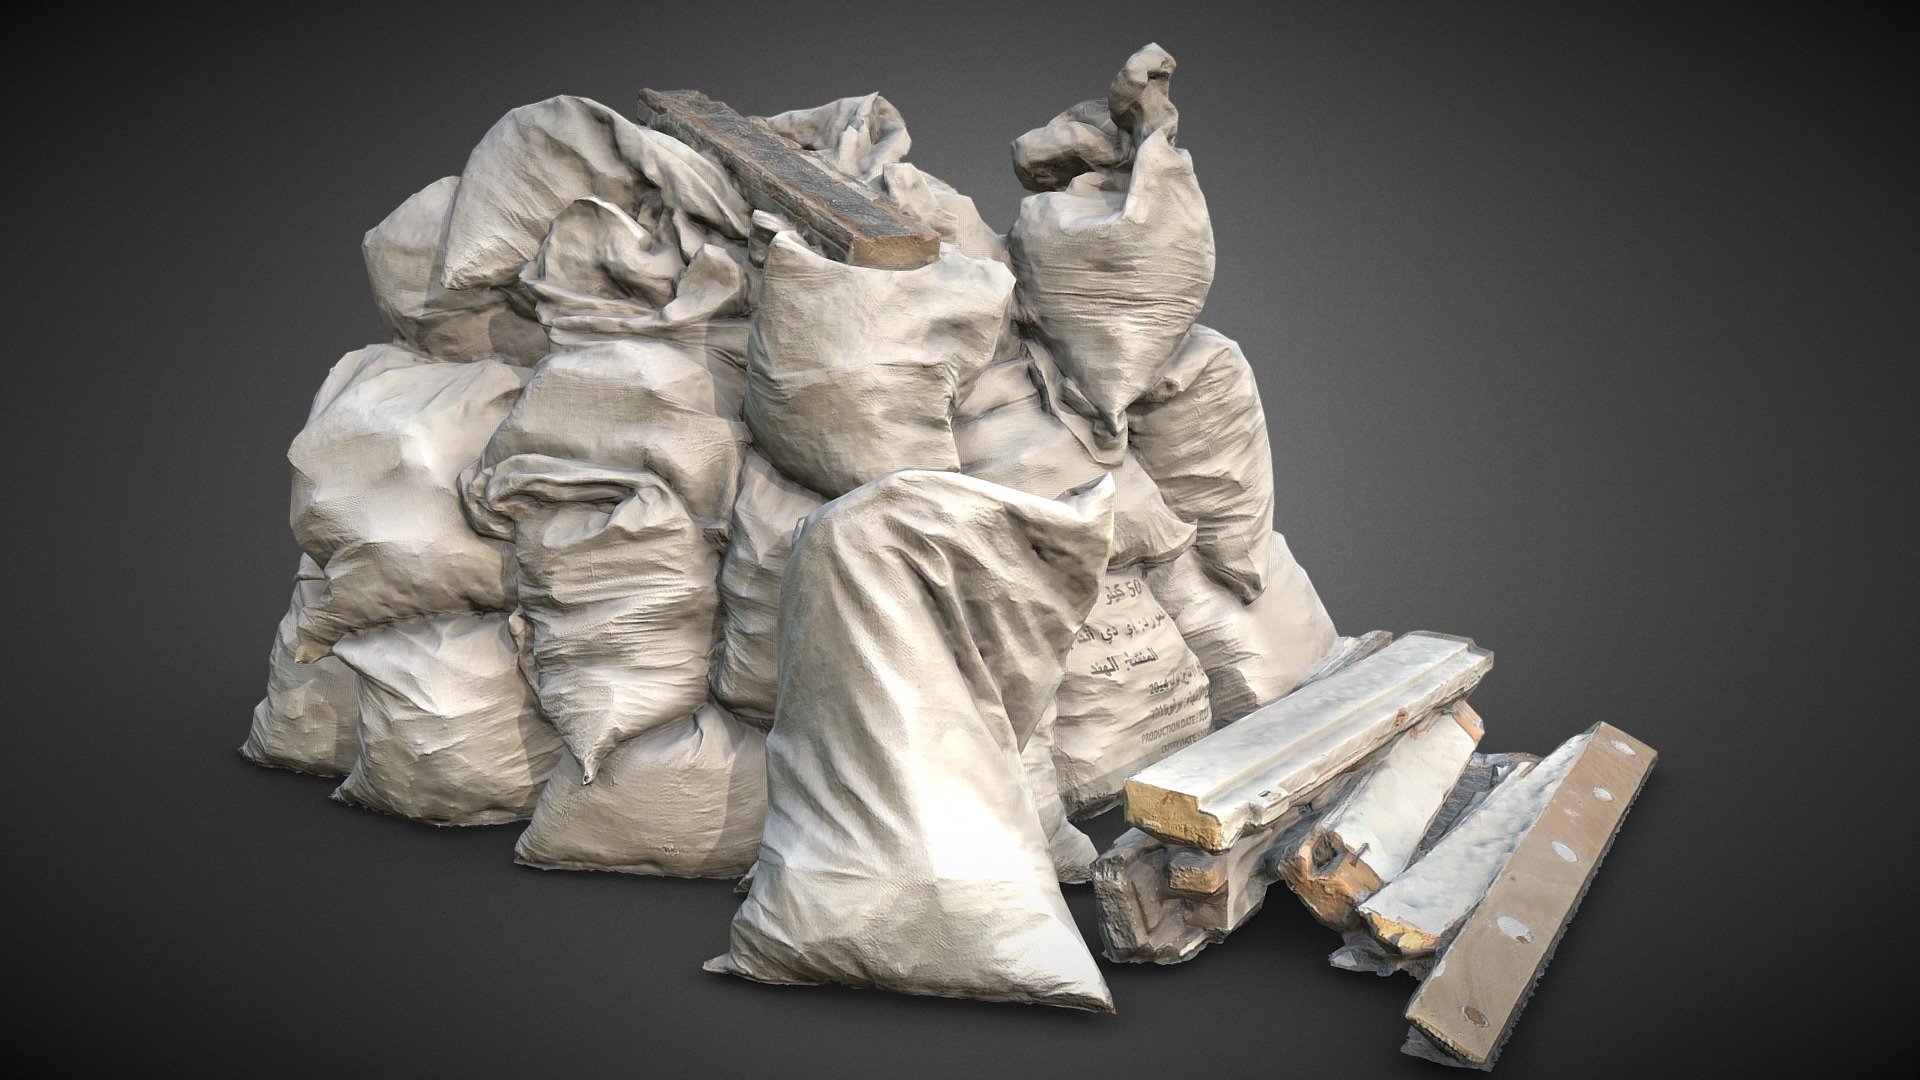 Workplace gravel bags and some wood pieces. Low poly gameready asset from scan. 4k PBR textures.
Ready to use in your game or scene for render 3d model